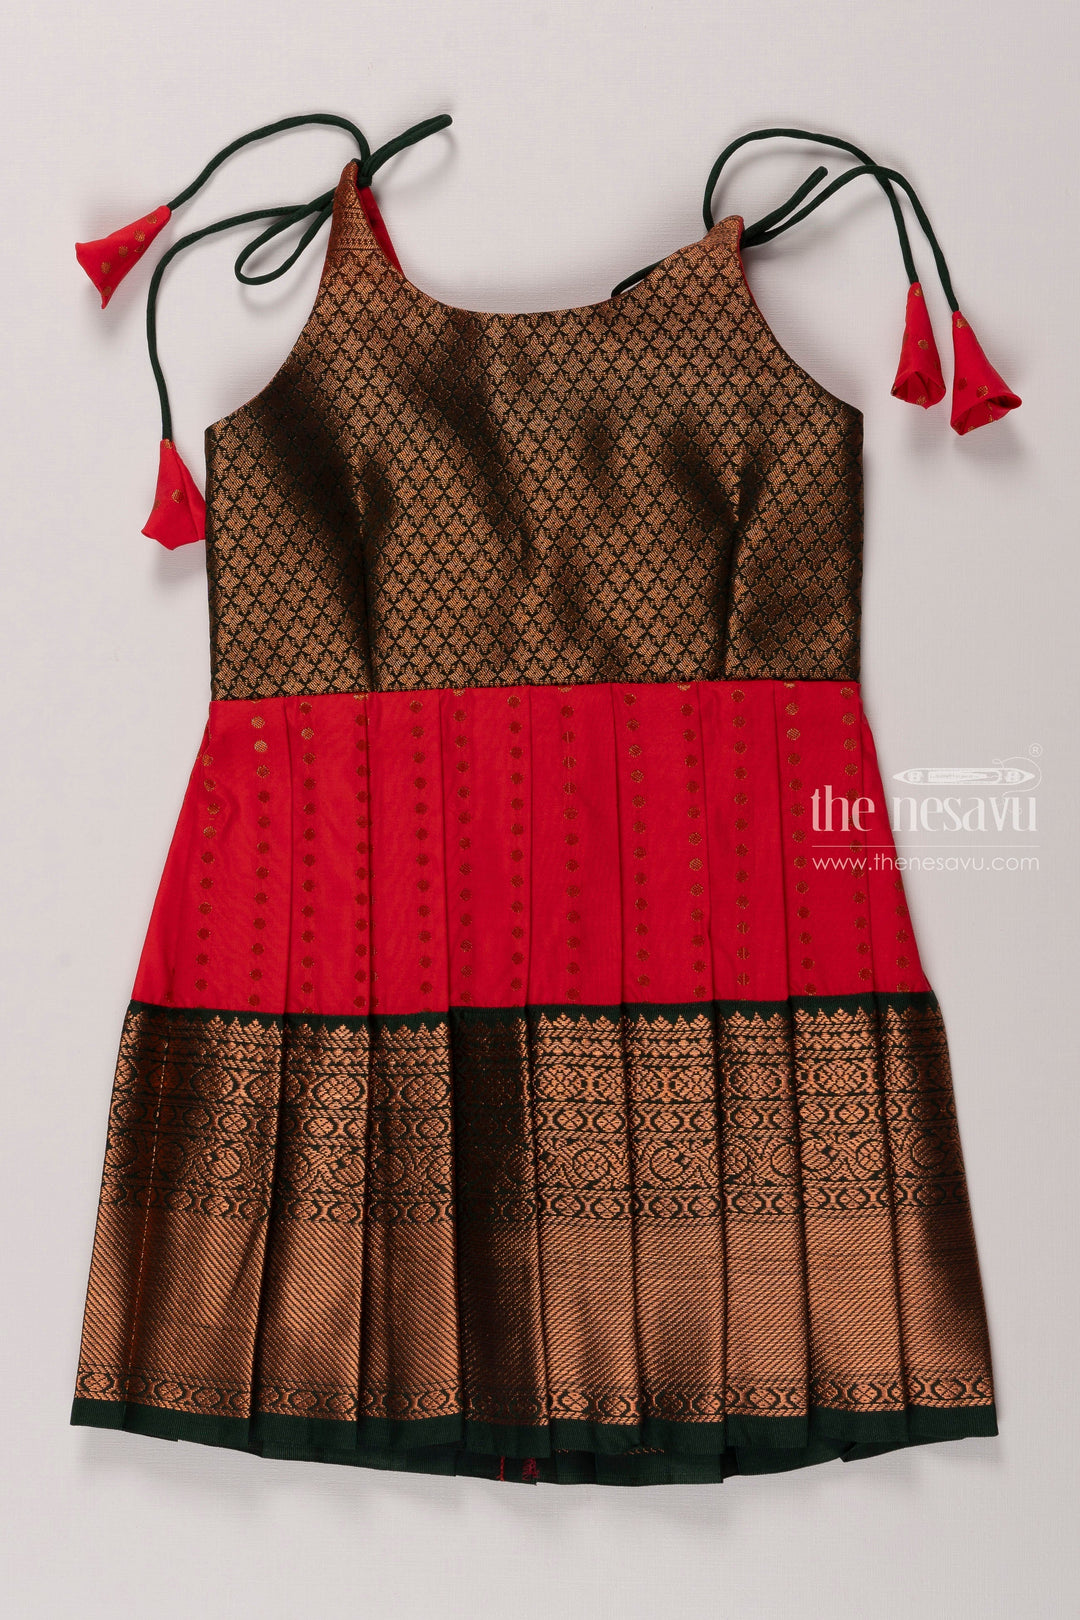 The Nesavu Tie-up Frock Elegant Red and Green Tie-up Silk Frock for Girls Nesavu 14 (6M) / Red / Style 1 T358A-14 Girls Red and Green Banarasi Border Silk Frock | Traditional Festive Wear | The Nesavu